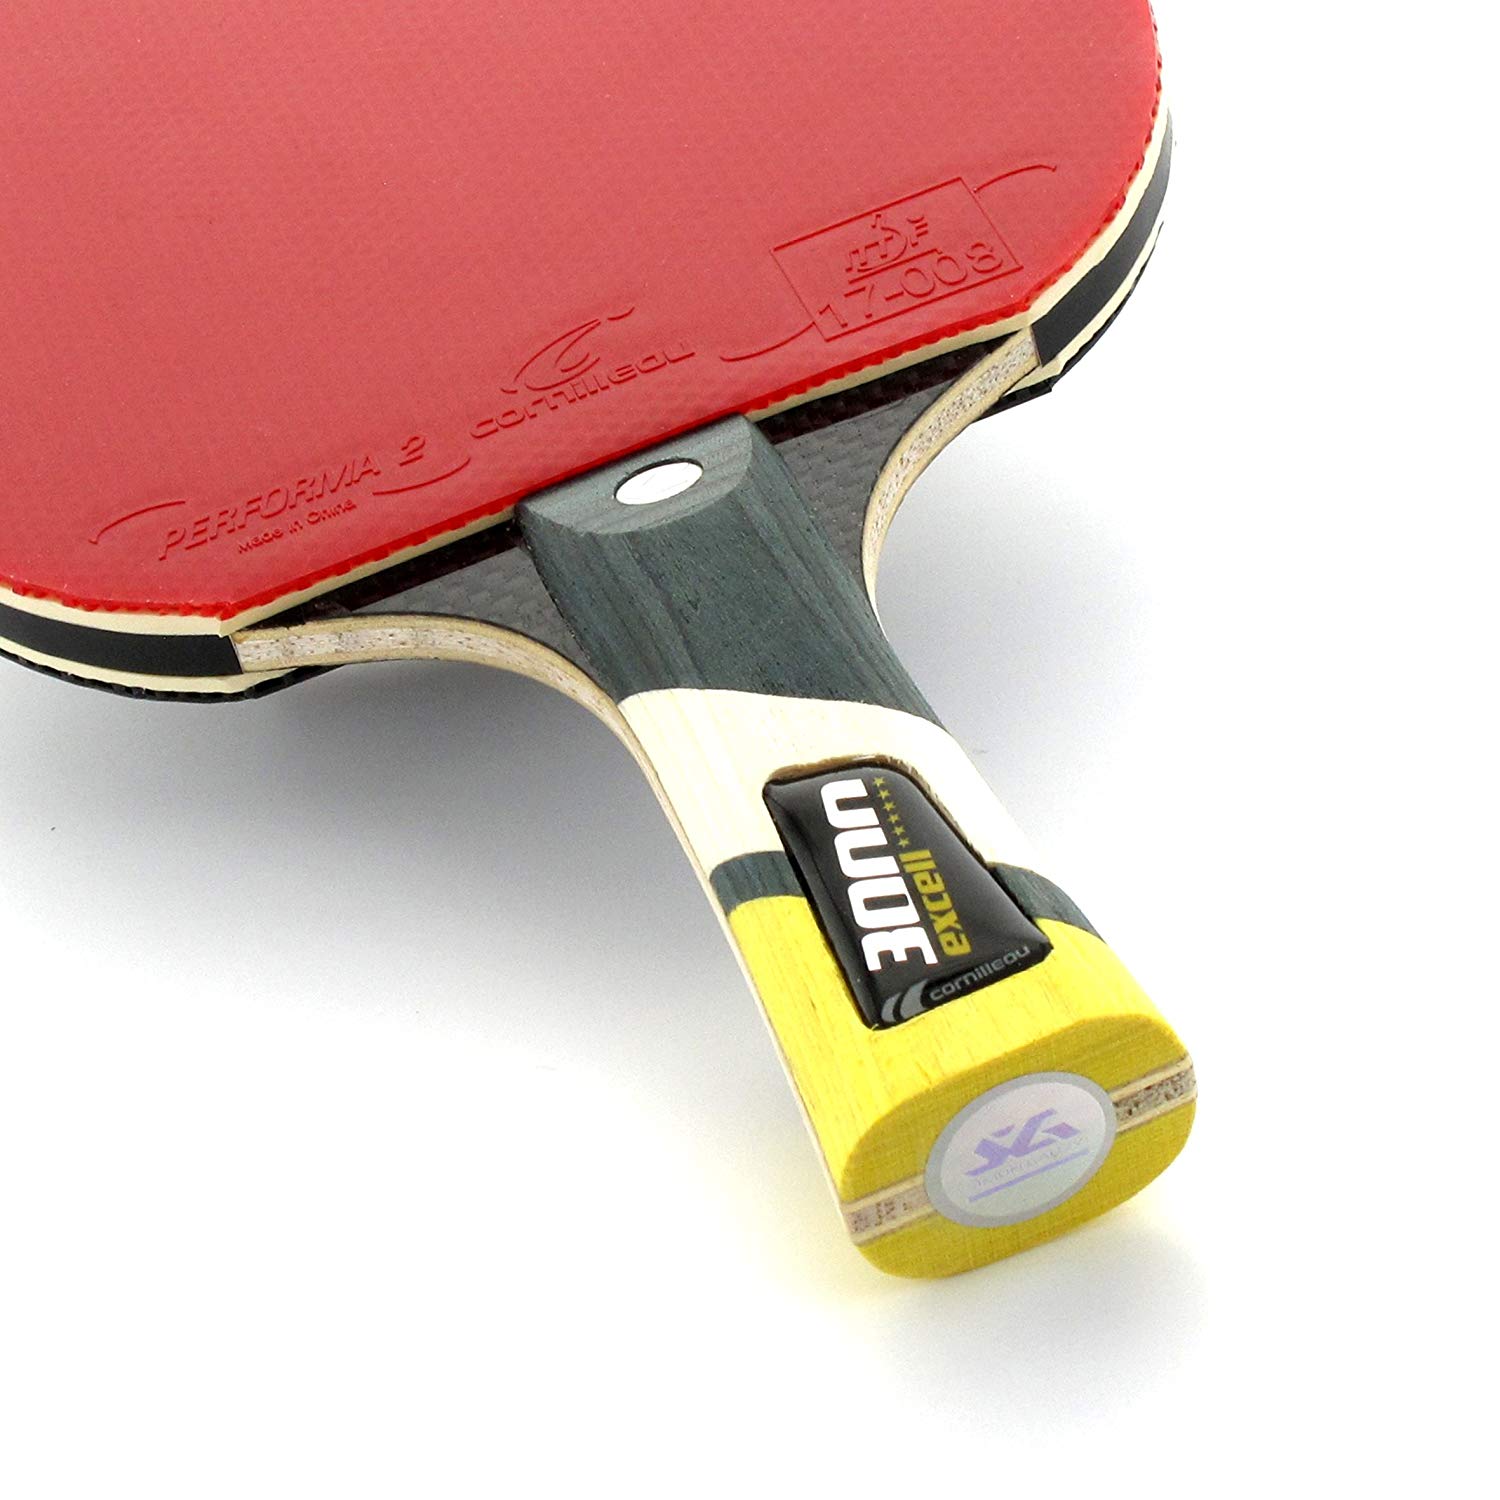 Pala Ping Pong Cornilleau Sport 3000 Excell Carbon 413000 - AliExpress